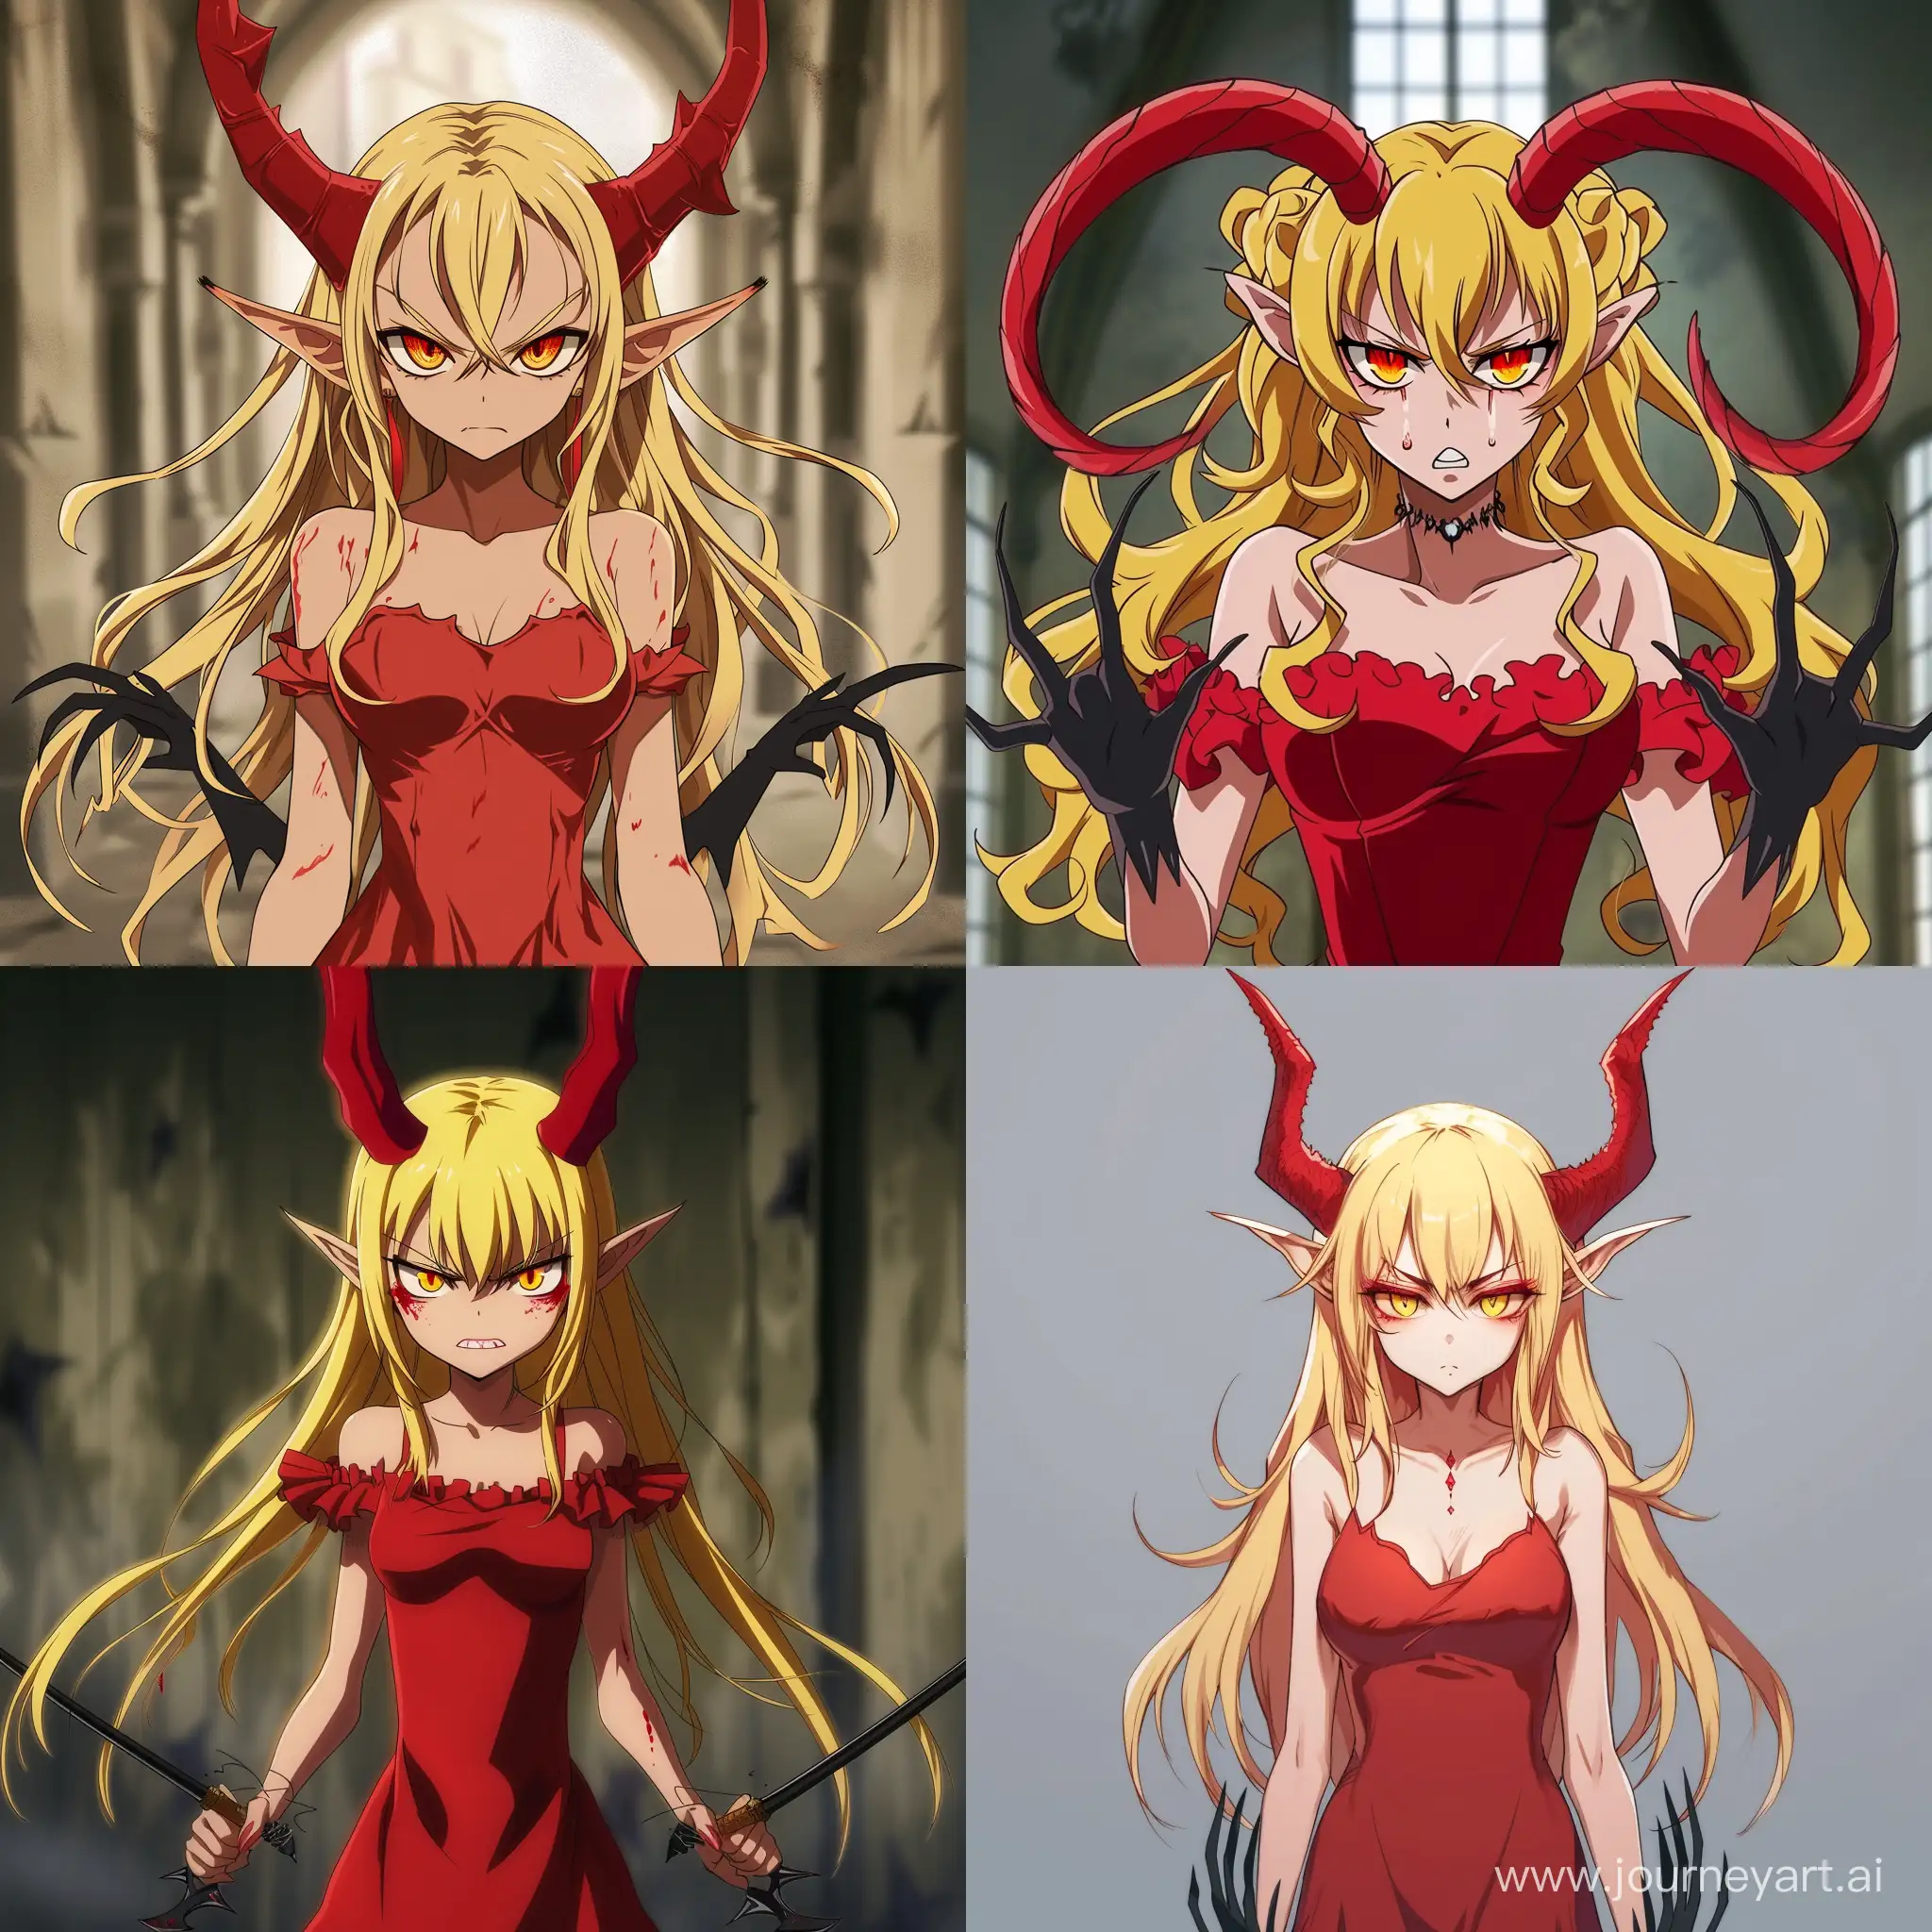 Sinister-Anime-Portrait-Daughter-of-Lucifer-in-Red-Dress-with-Horns-and-Claws